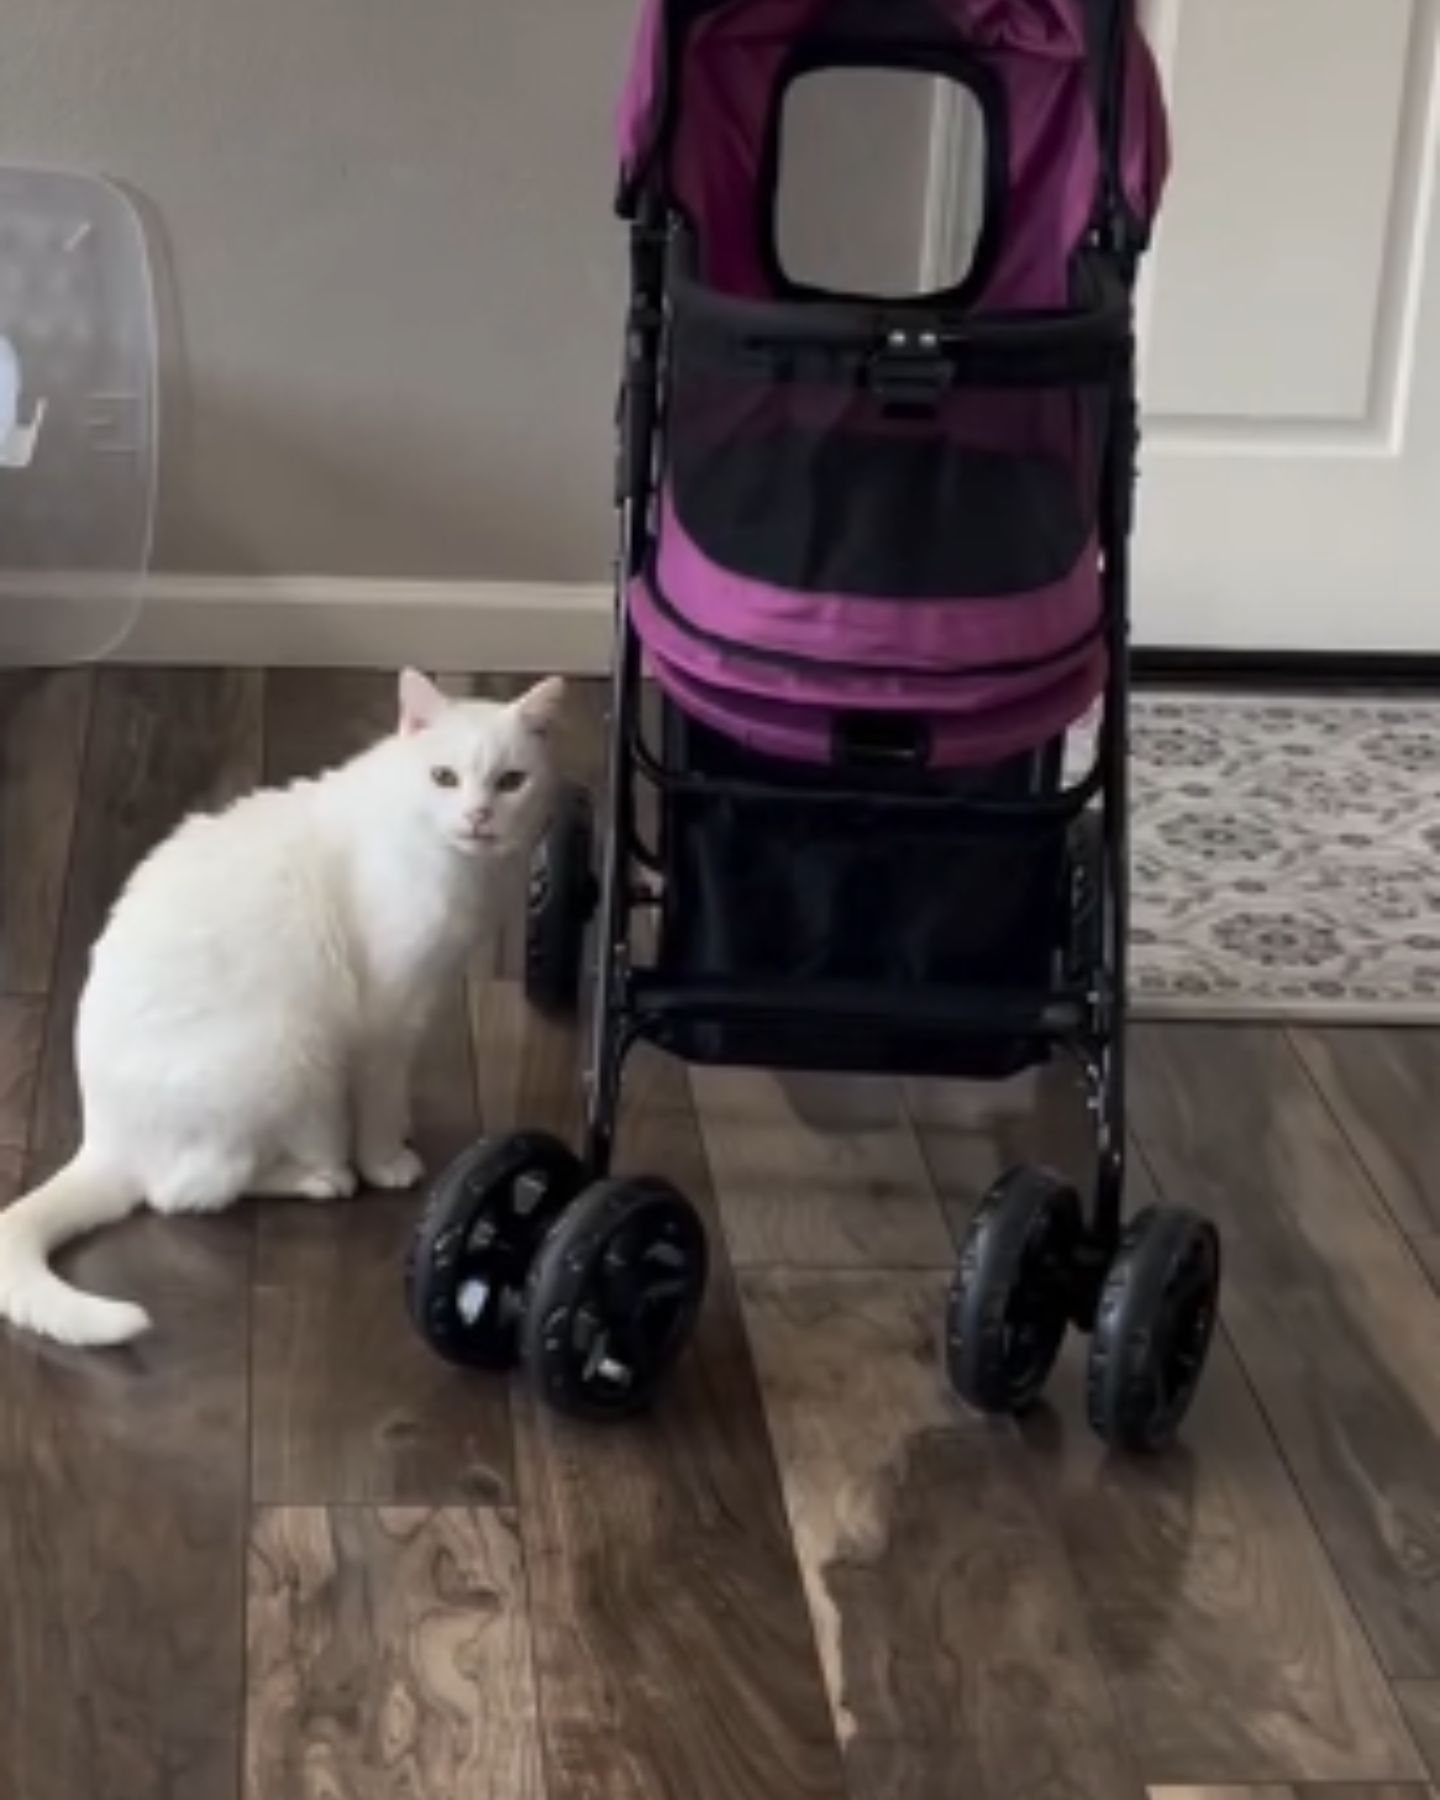 cat sitting next to a stroller